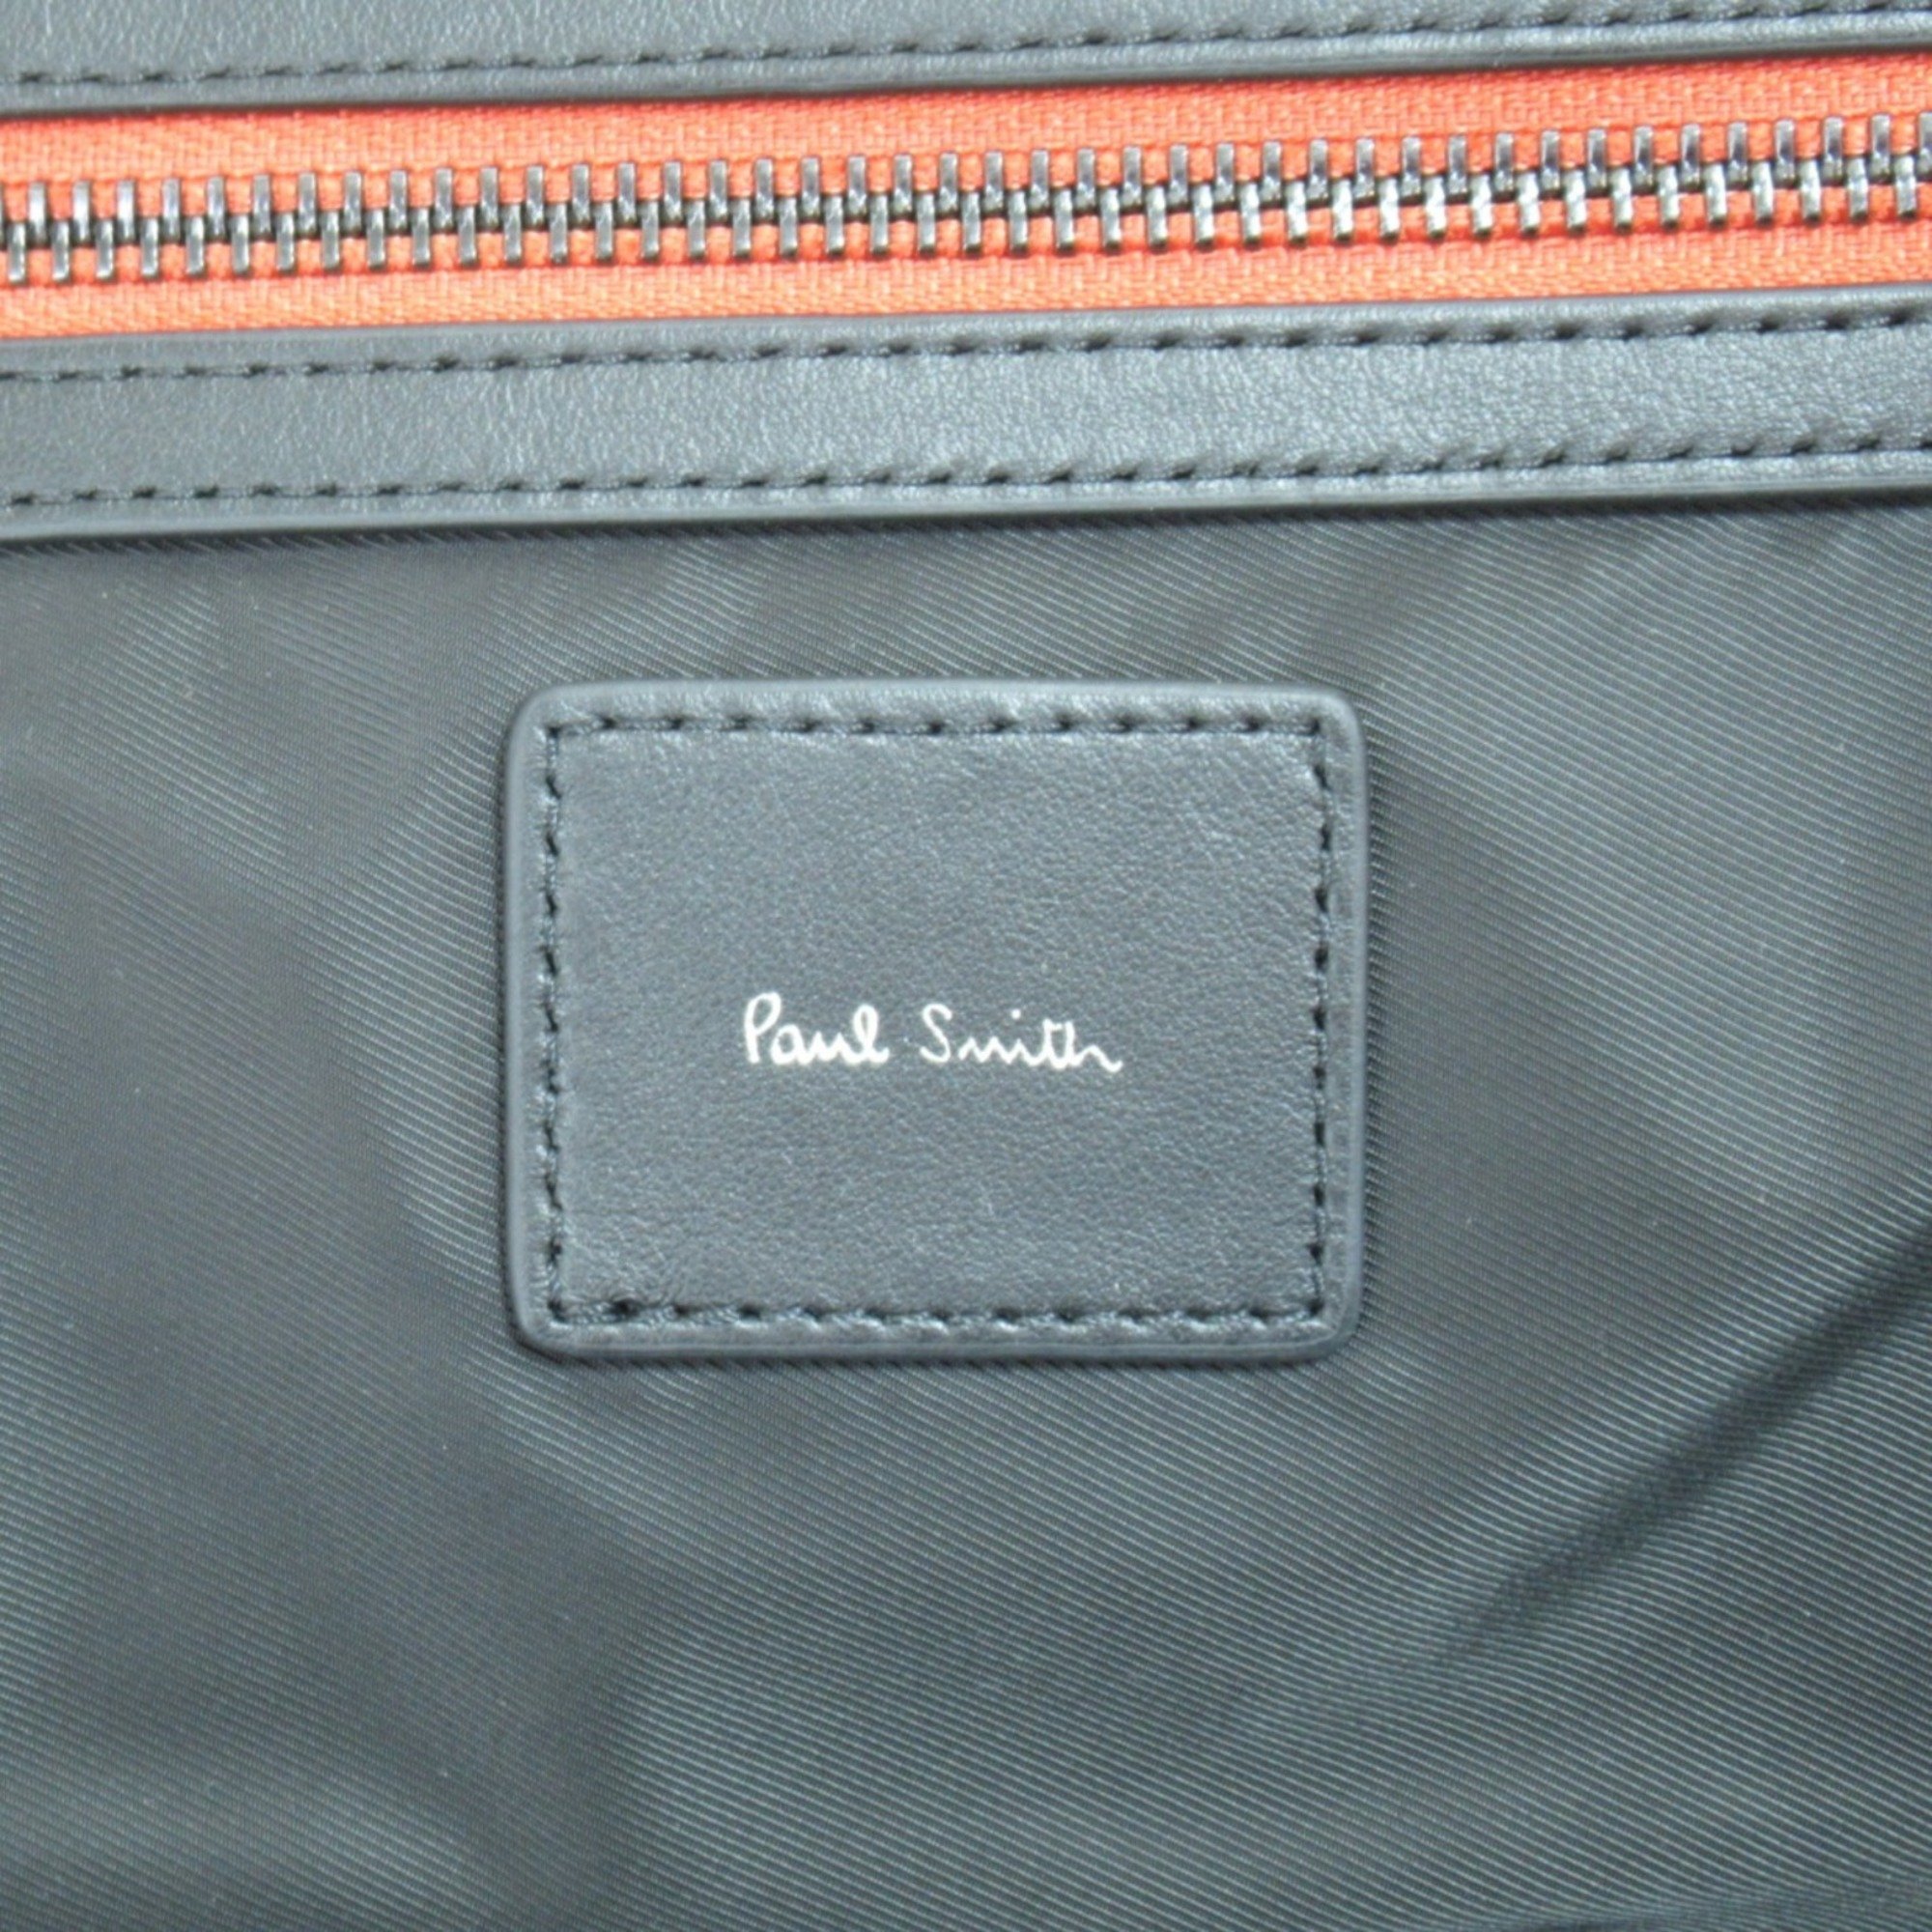 Paul Smith Ruck Backpack Navy polyamide 746547